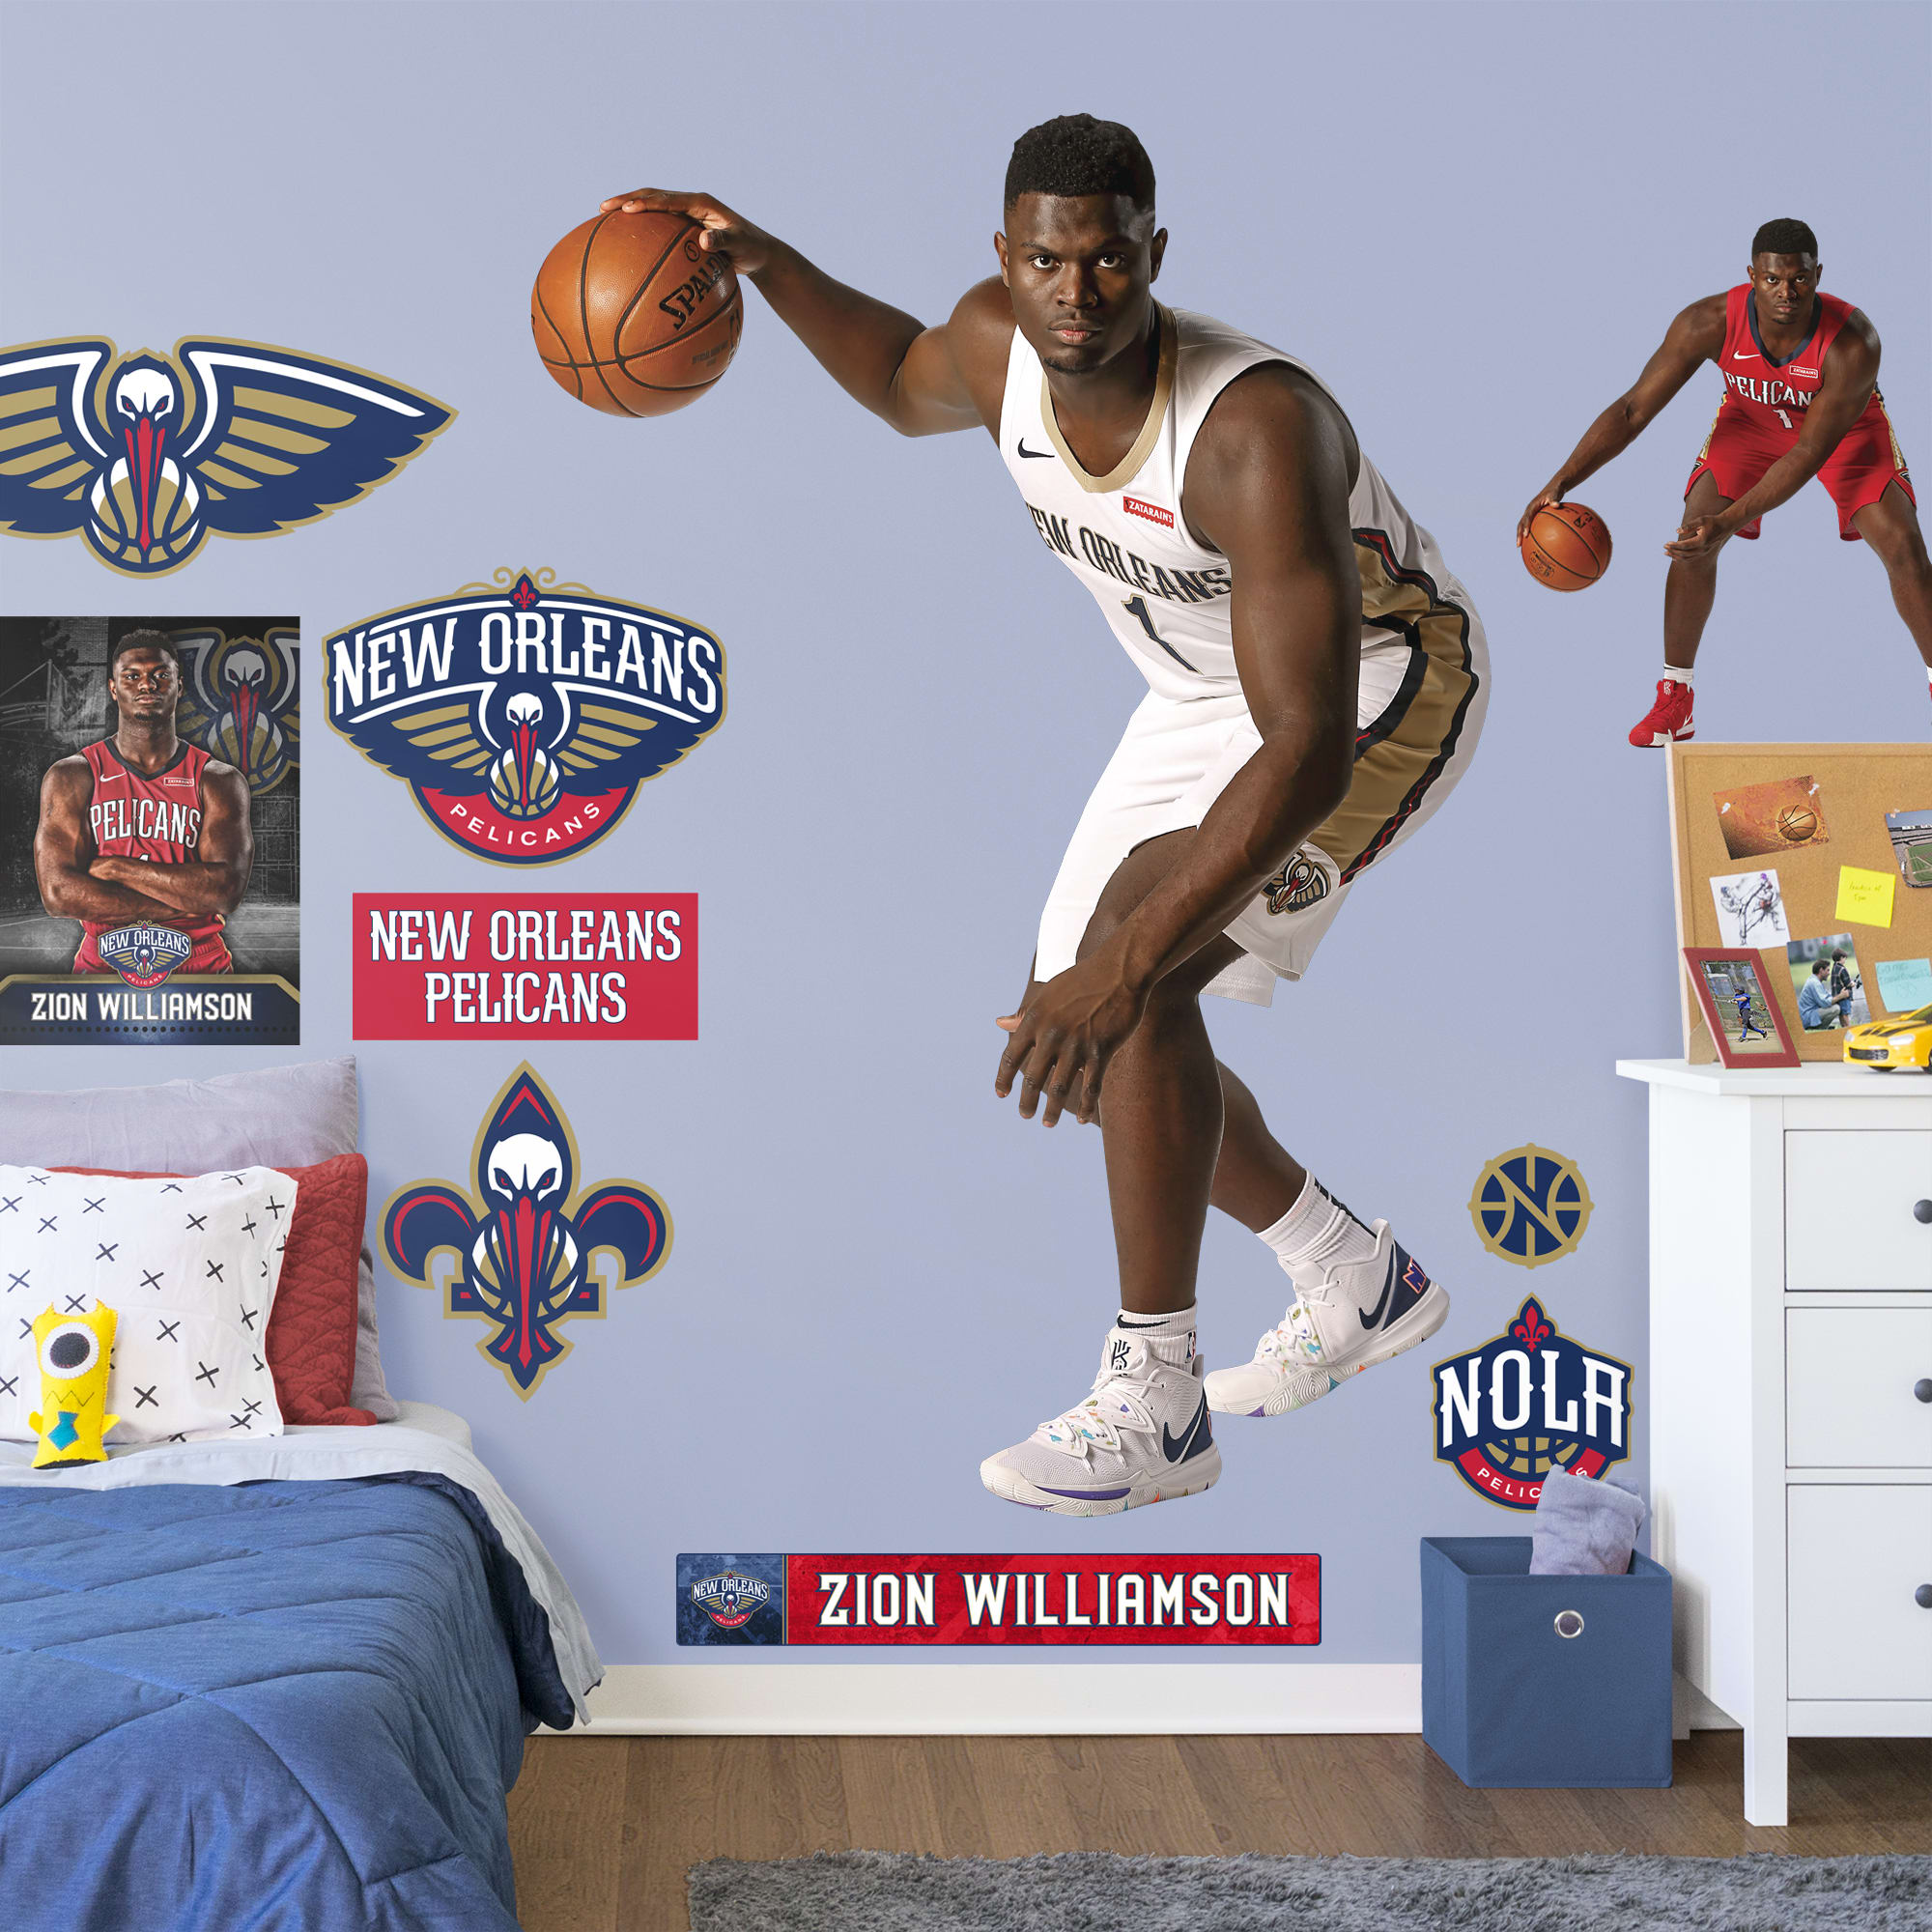 Zion Williamson for New Orleans Pelicans - Officially Licensed NBA Removable Wall Decal Life-Size Athlete + 9 Decals (48"W x 70"